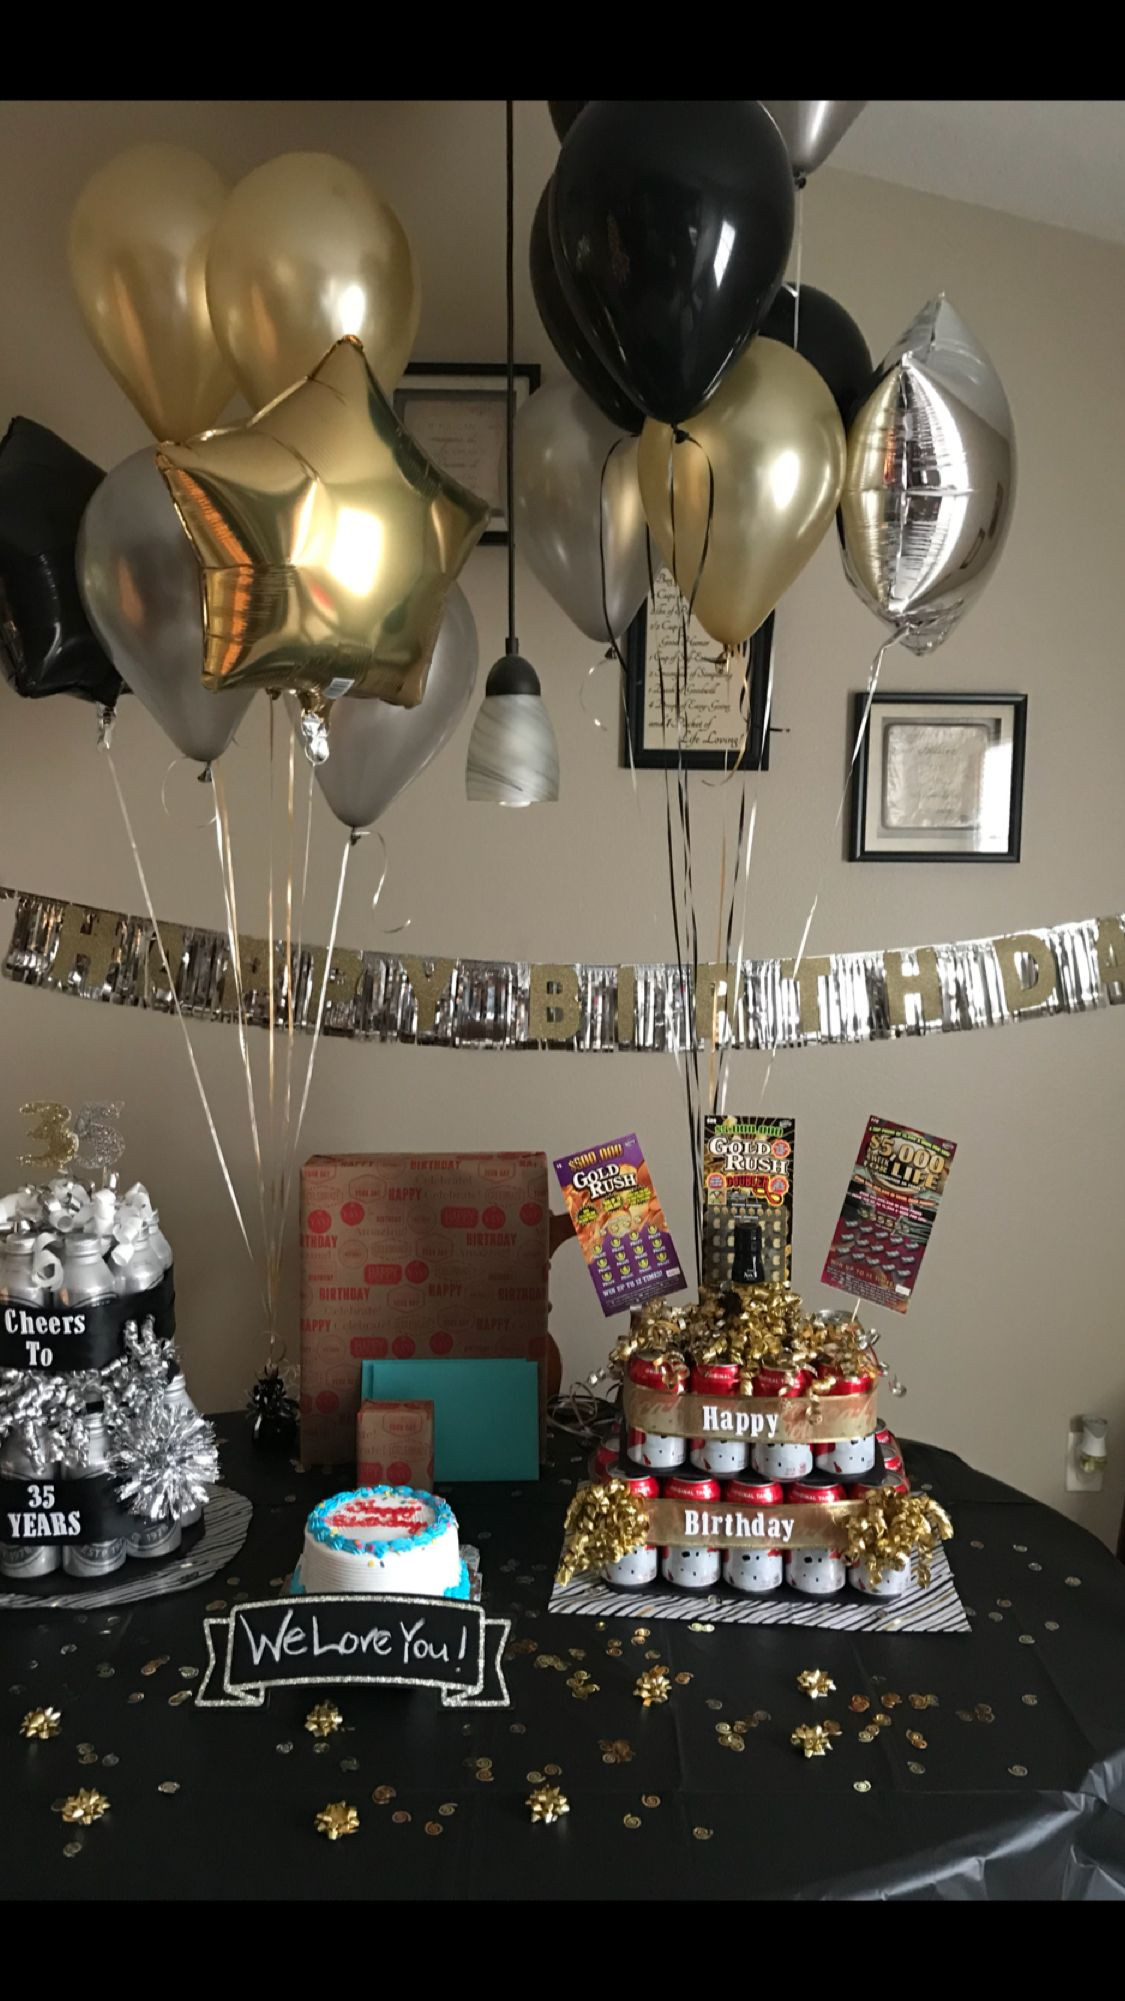 Surprise Birthday Party Ideas For Husband
 Husband birthday surprise